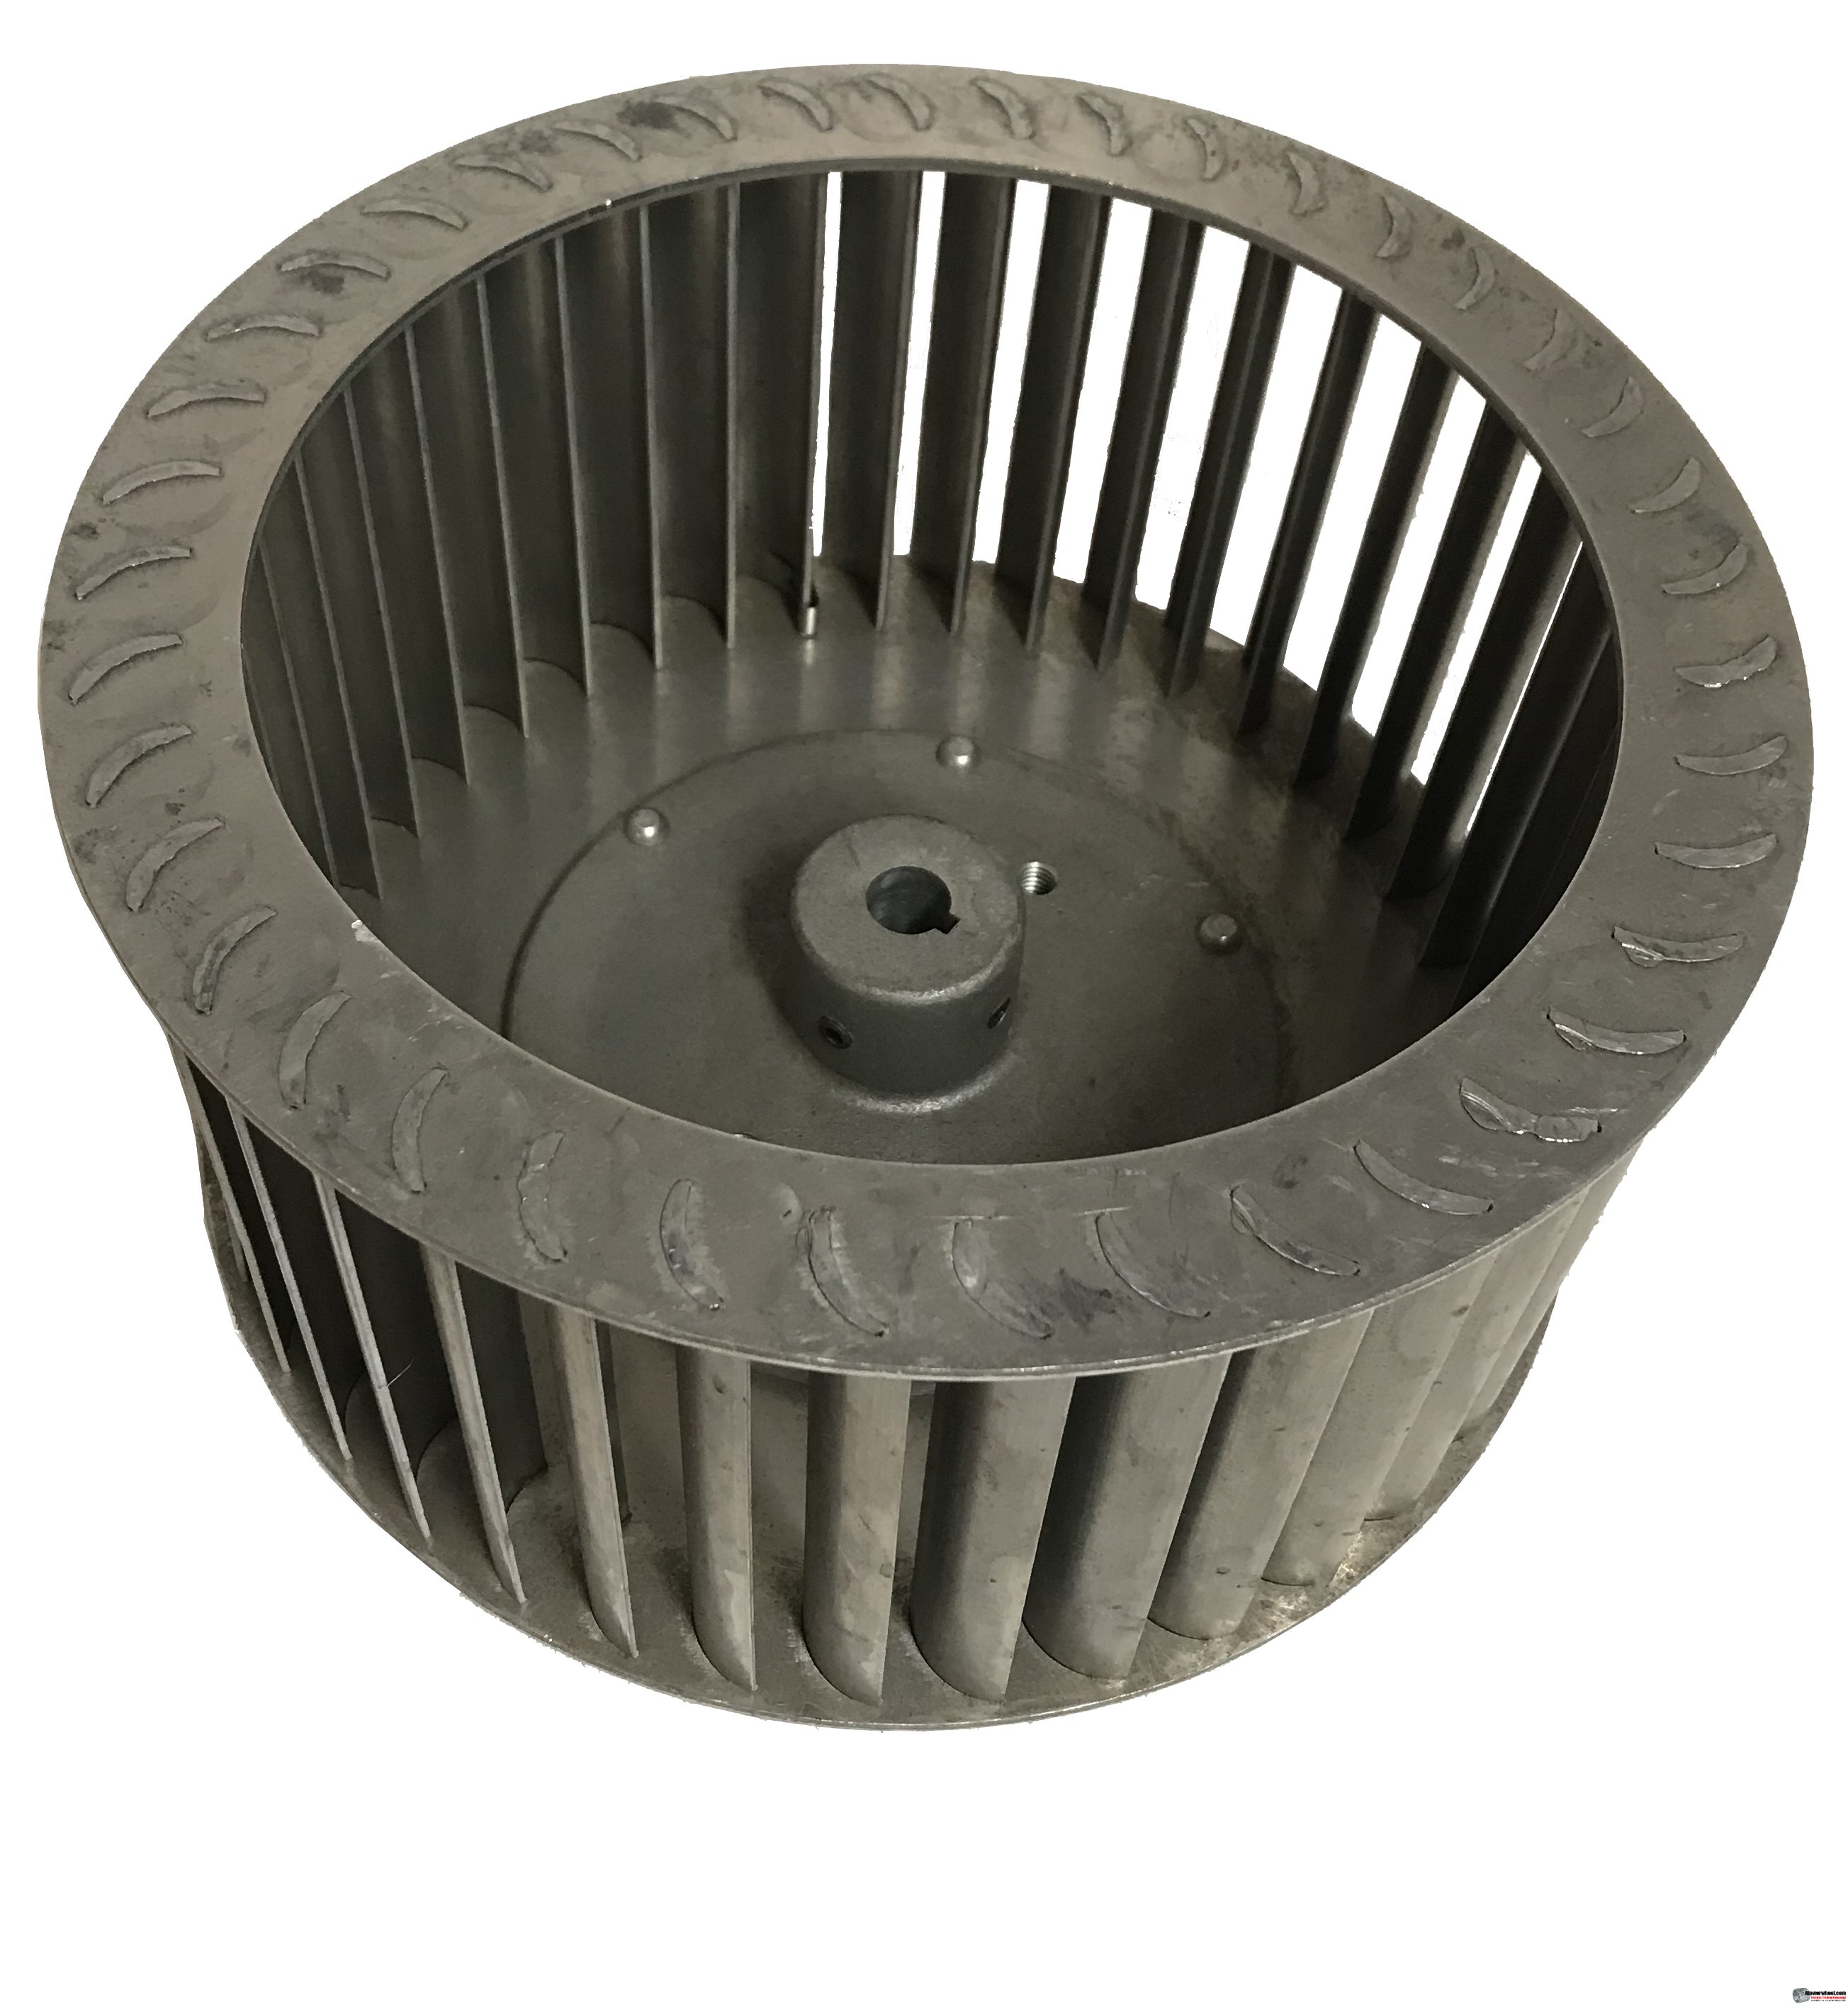 Single Inlet Aluminum Blower Wheel 10-5/8" Diameter 5-1/4" Width 5/8" Bore with Clockwise Rotation SKU: 10200508-020-A-T-CW-001